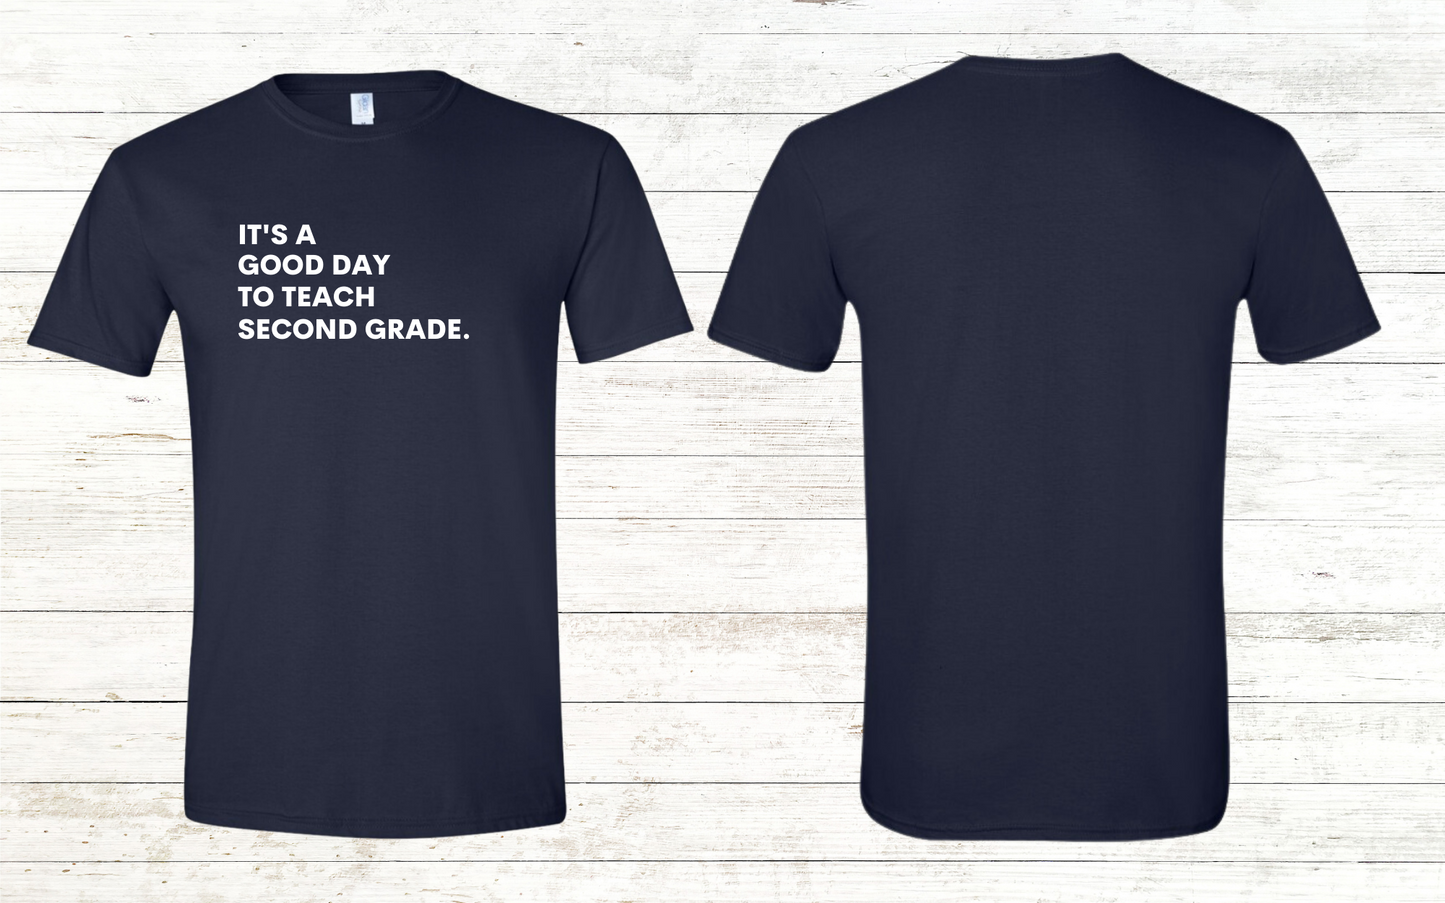 It is a Good Day to Teach Adult Crewneck Tee - Personalized with Grade Level